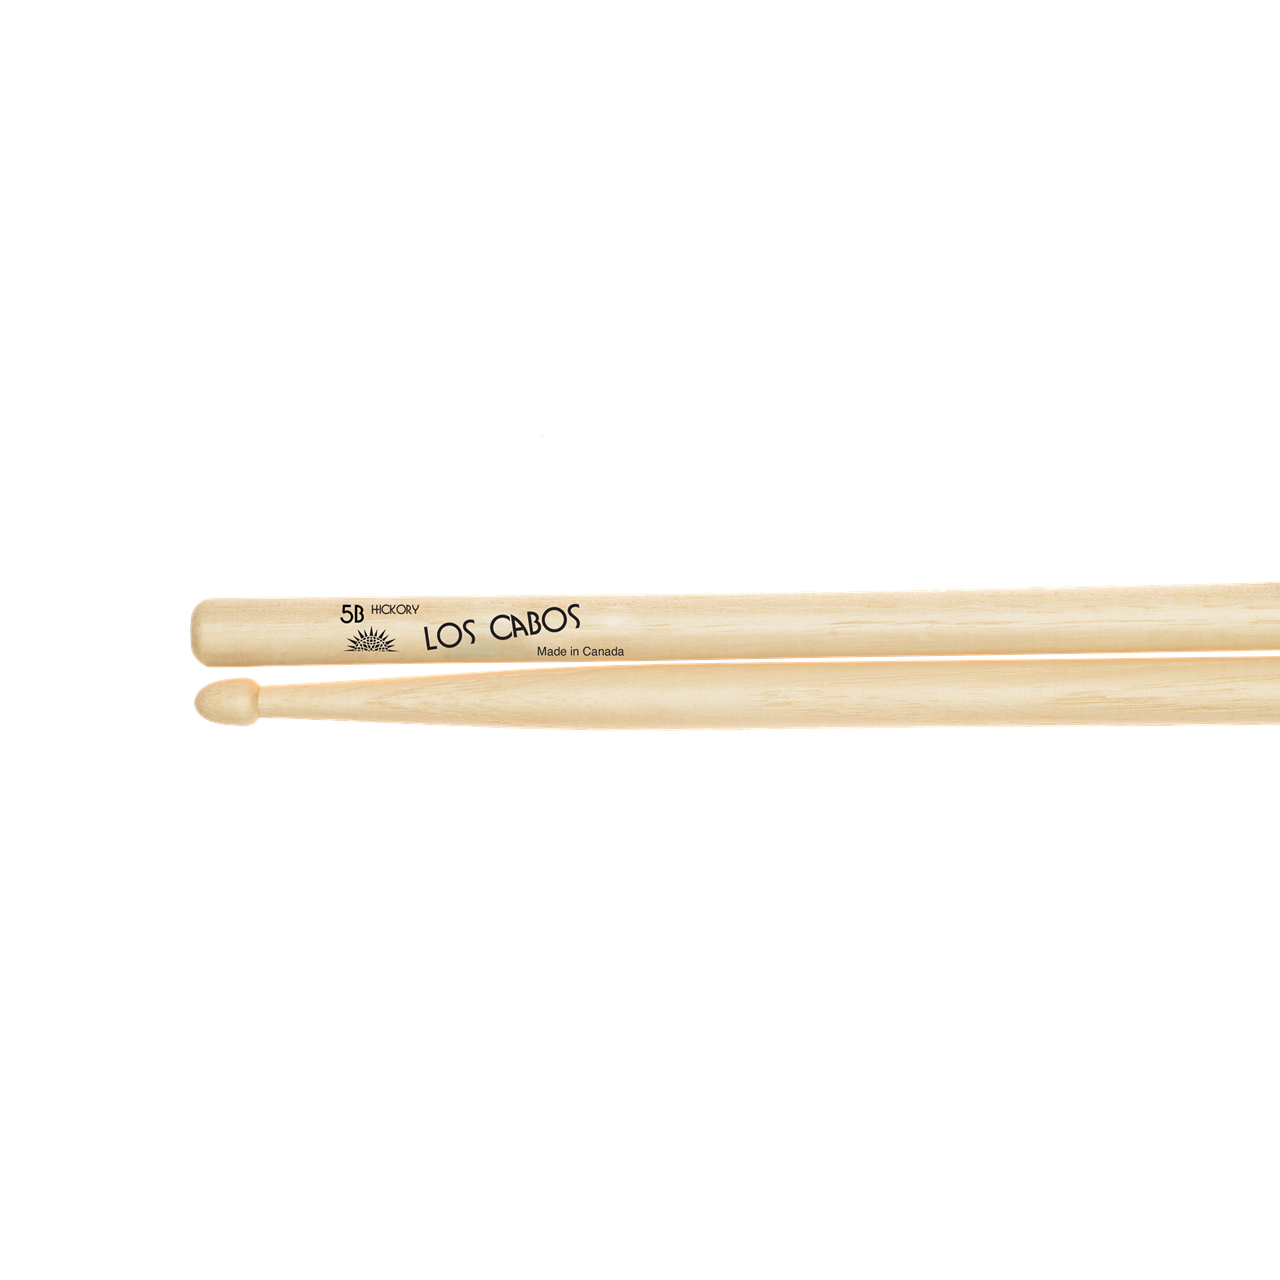 Los Cabos Drumstick 5B White Hickory